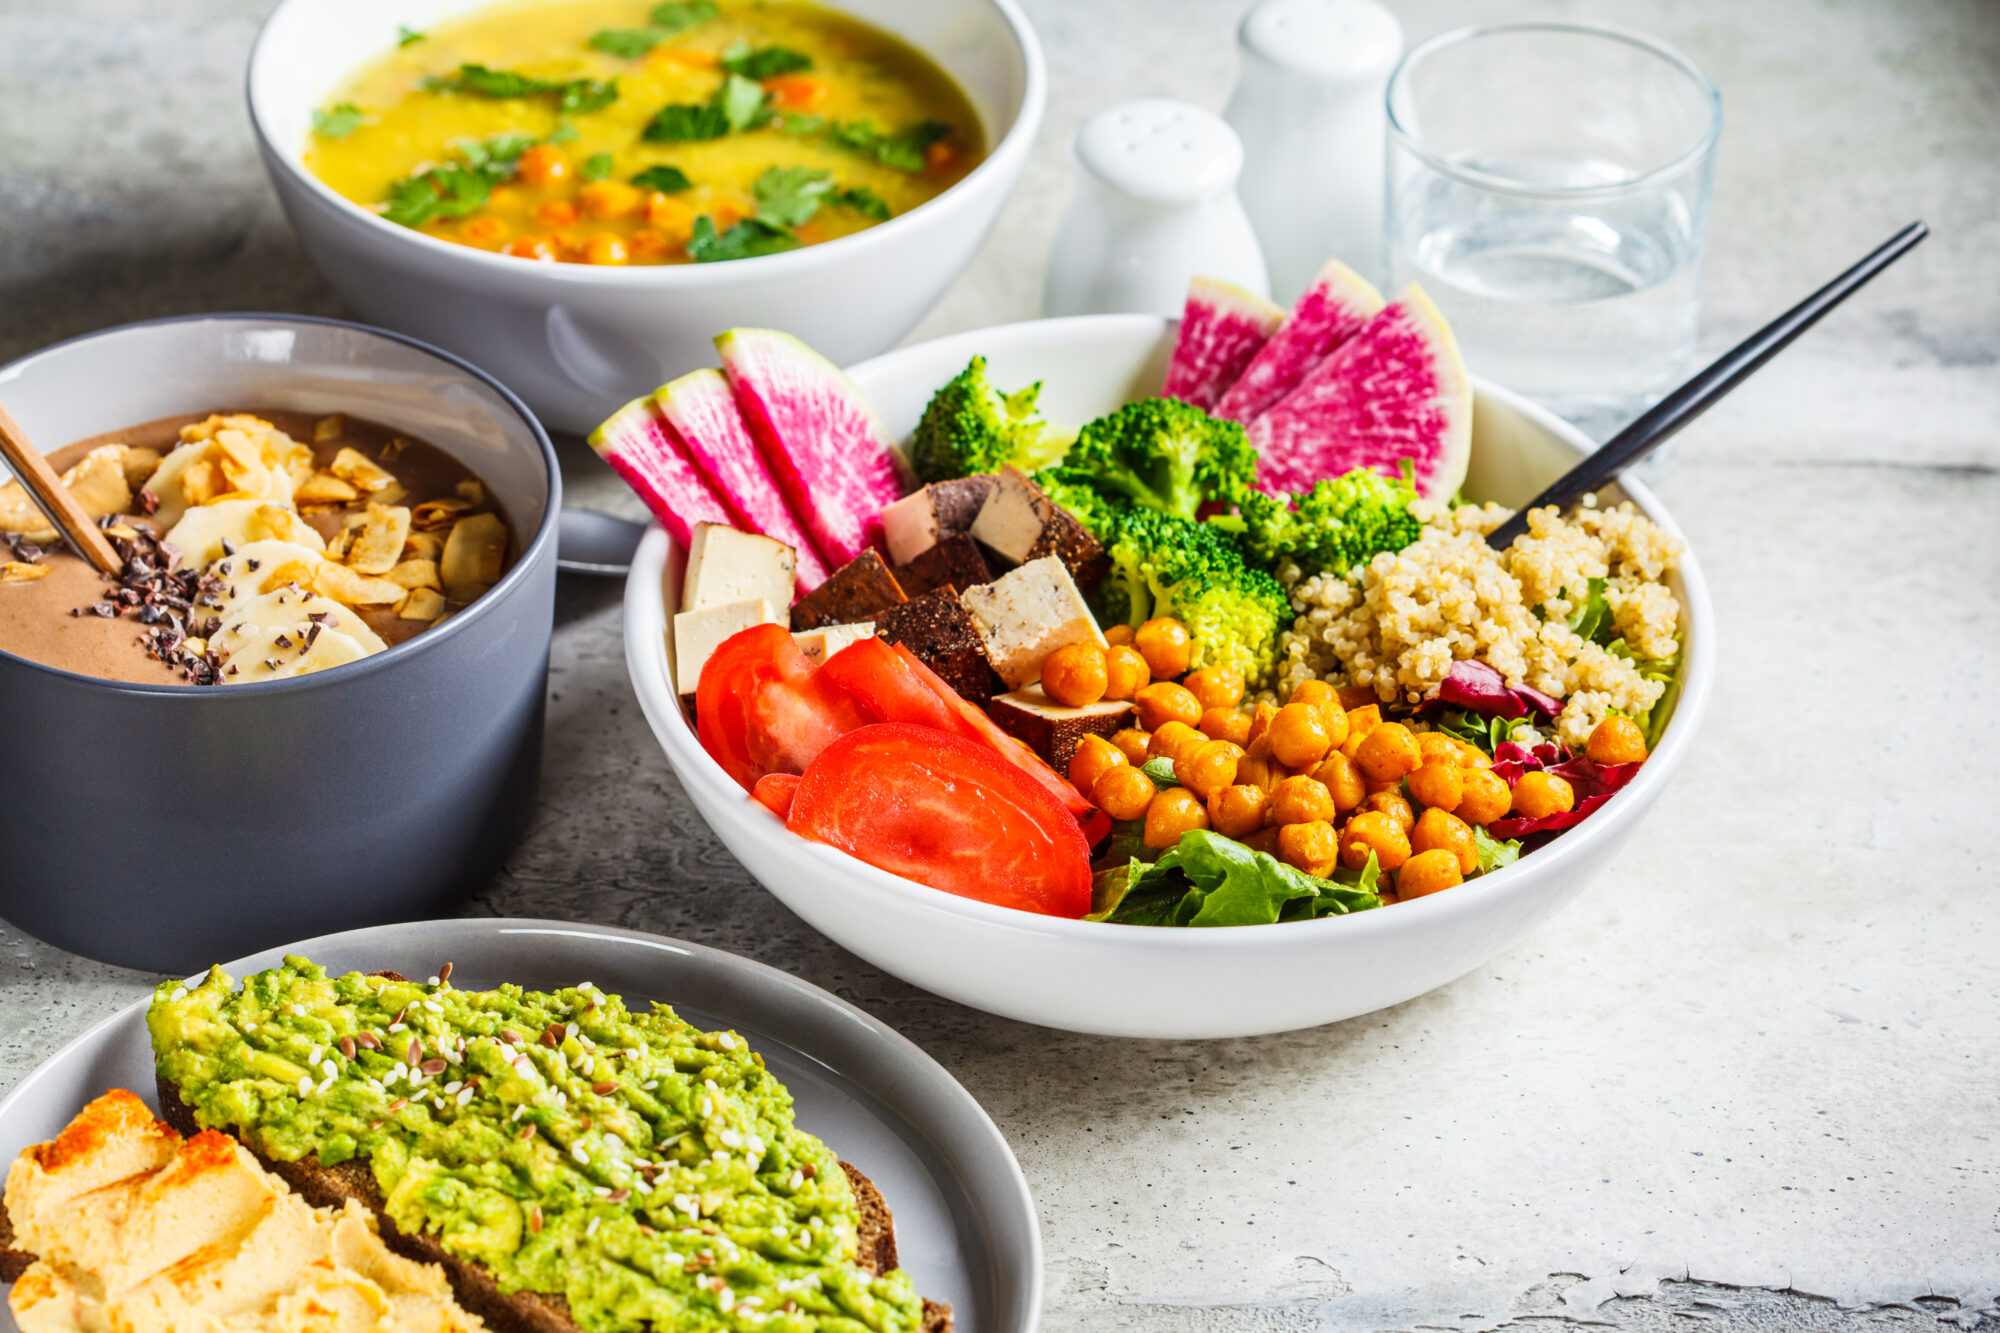 A close-up image of a colorful vegan lunch, with a rice bowl, bowl of soup, avocado toast, and chocolate smoothie bowl.